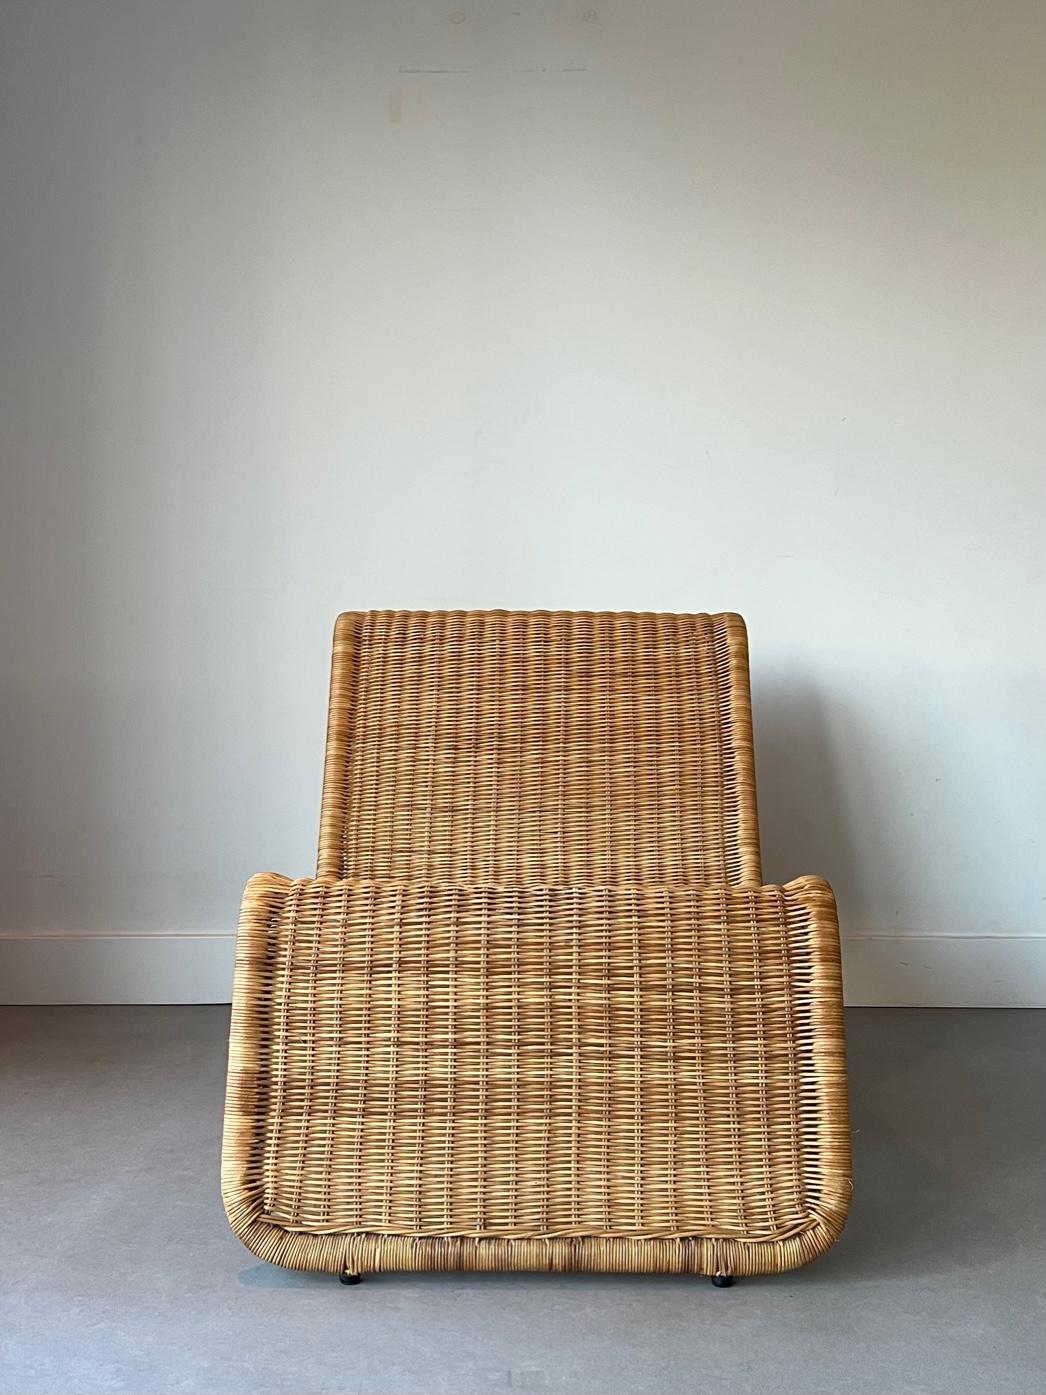 This stunning and very comfortable rattan lounge chair is called Hestra and was produced by Ikea around the same time (1982) as the of design of Tito Agnoli, the P3, made by Pierantonio Bonacina. This is more however is more sloping chair. The chair